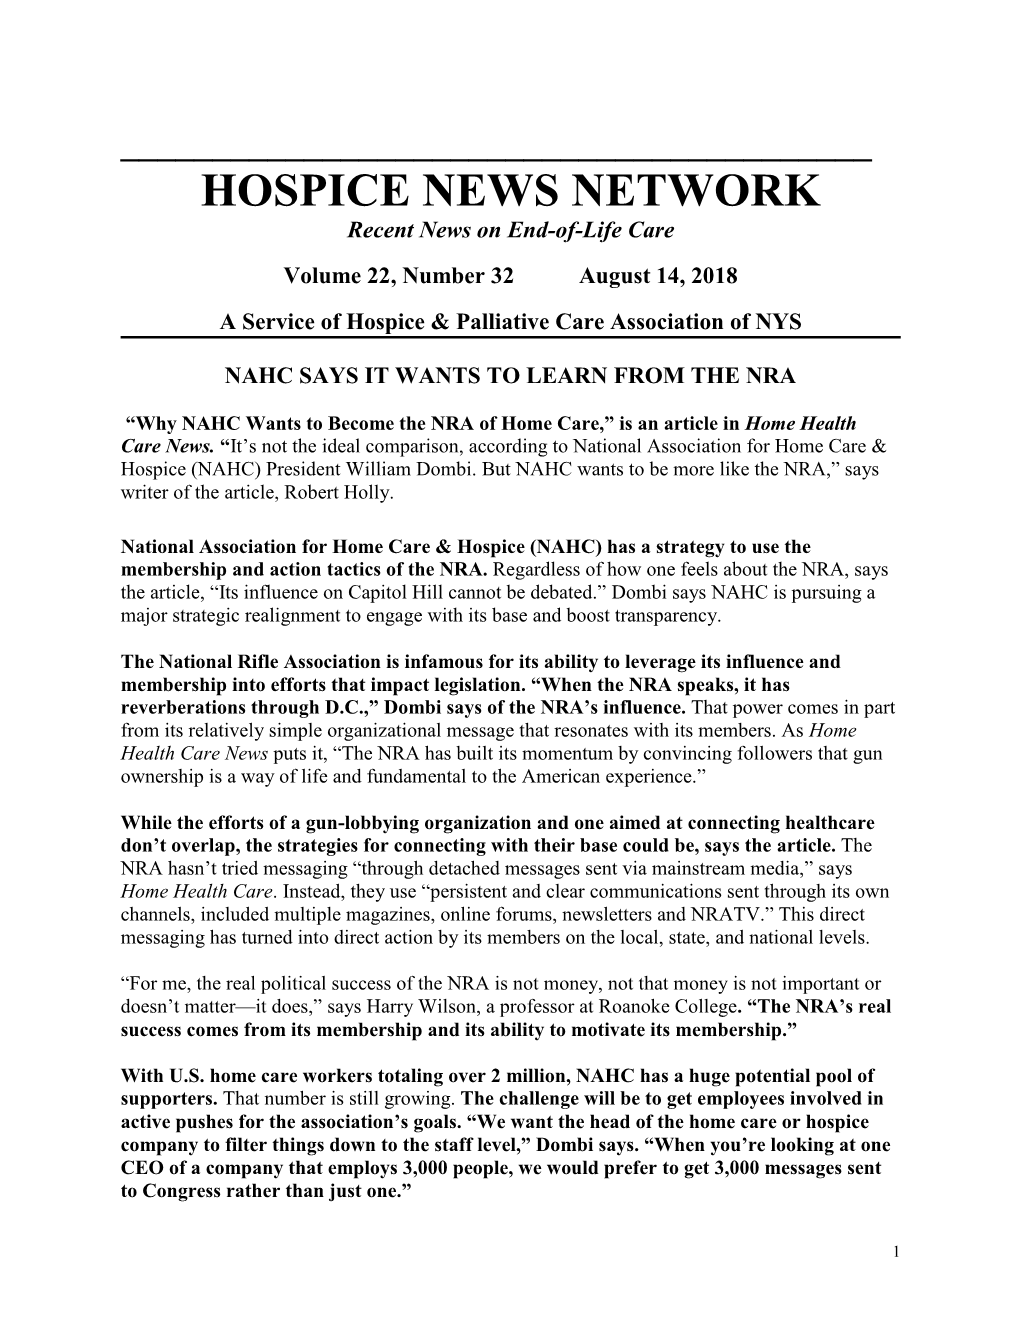 HOSPICE NEWS NETWORK Recent News on End-Of-Life Care